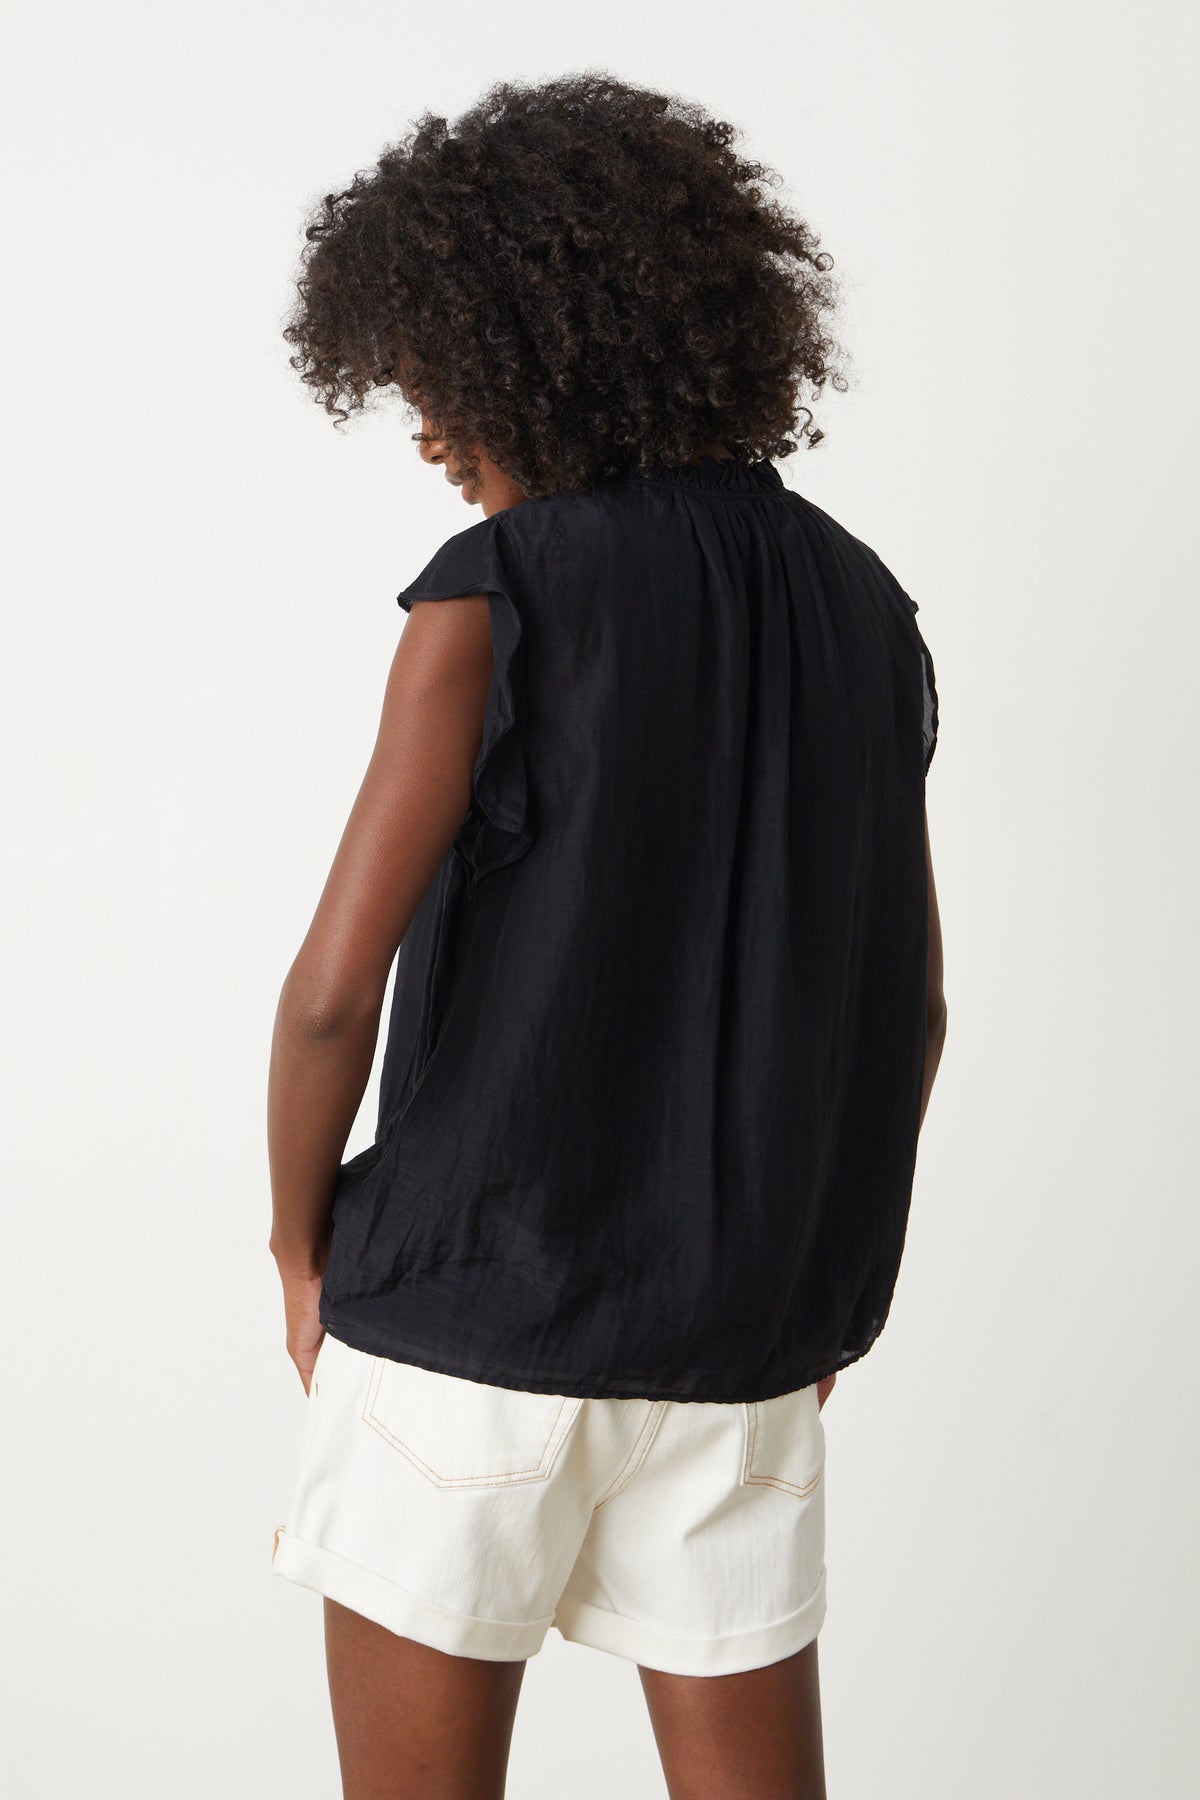 The back view of a woman wearing a Velvet by Graham & Spencer Melanie V-Neck Blouse and shorts.-35205235769537